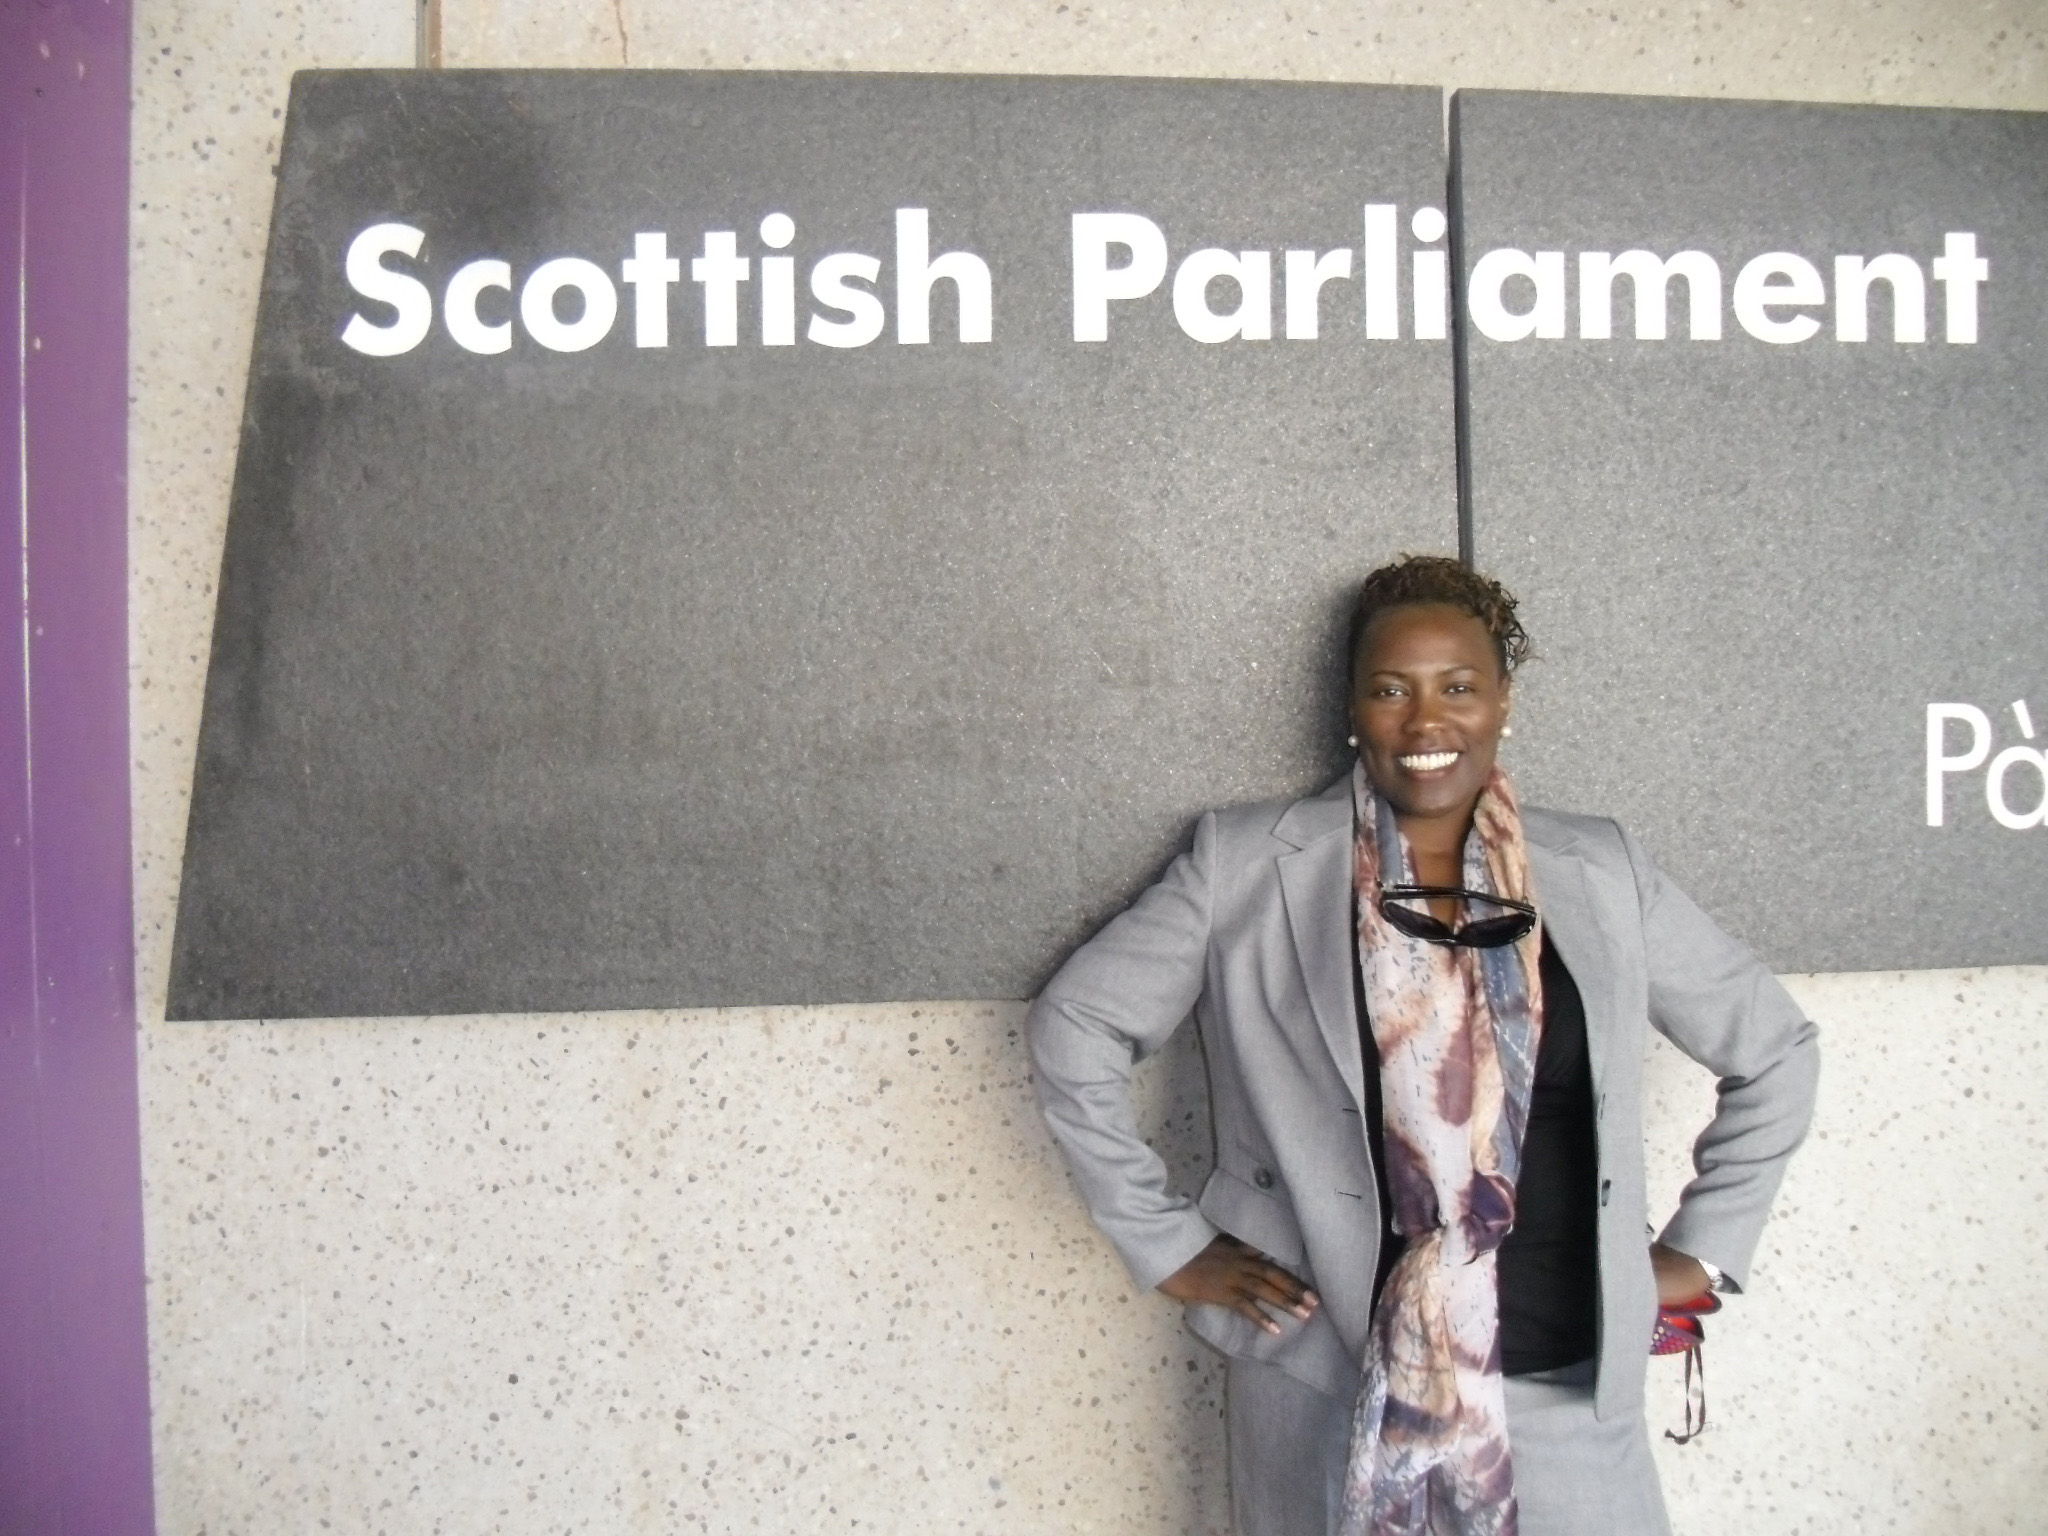 Stephanie Jackson outside the entrance to the Scottish Parliament in Edinburgh, Scotland, during her Fulbright program visit to the United Kingdom.